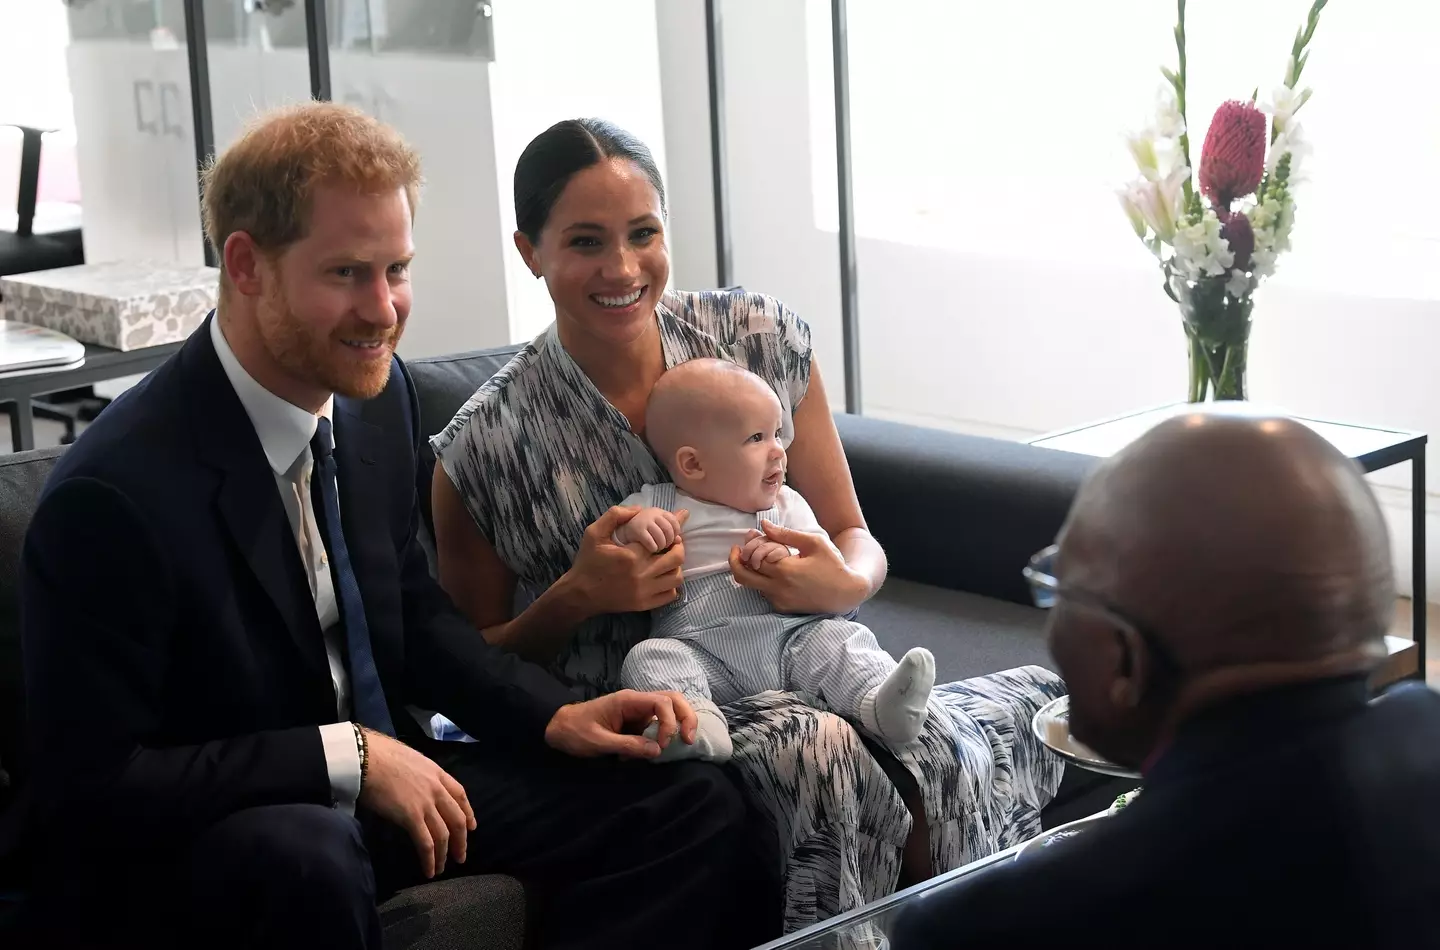 Archie is Harry and Meghan's first child, born in 2019.